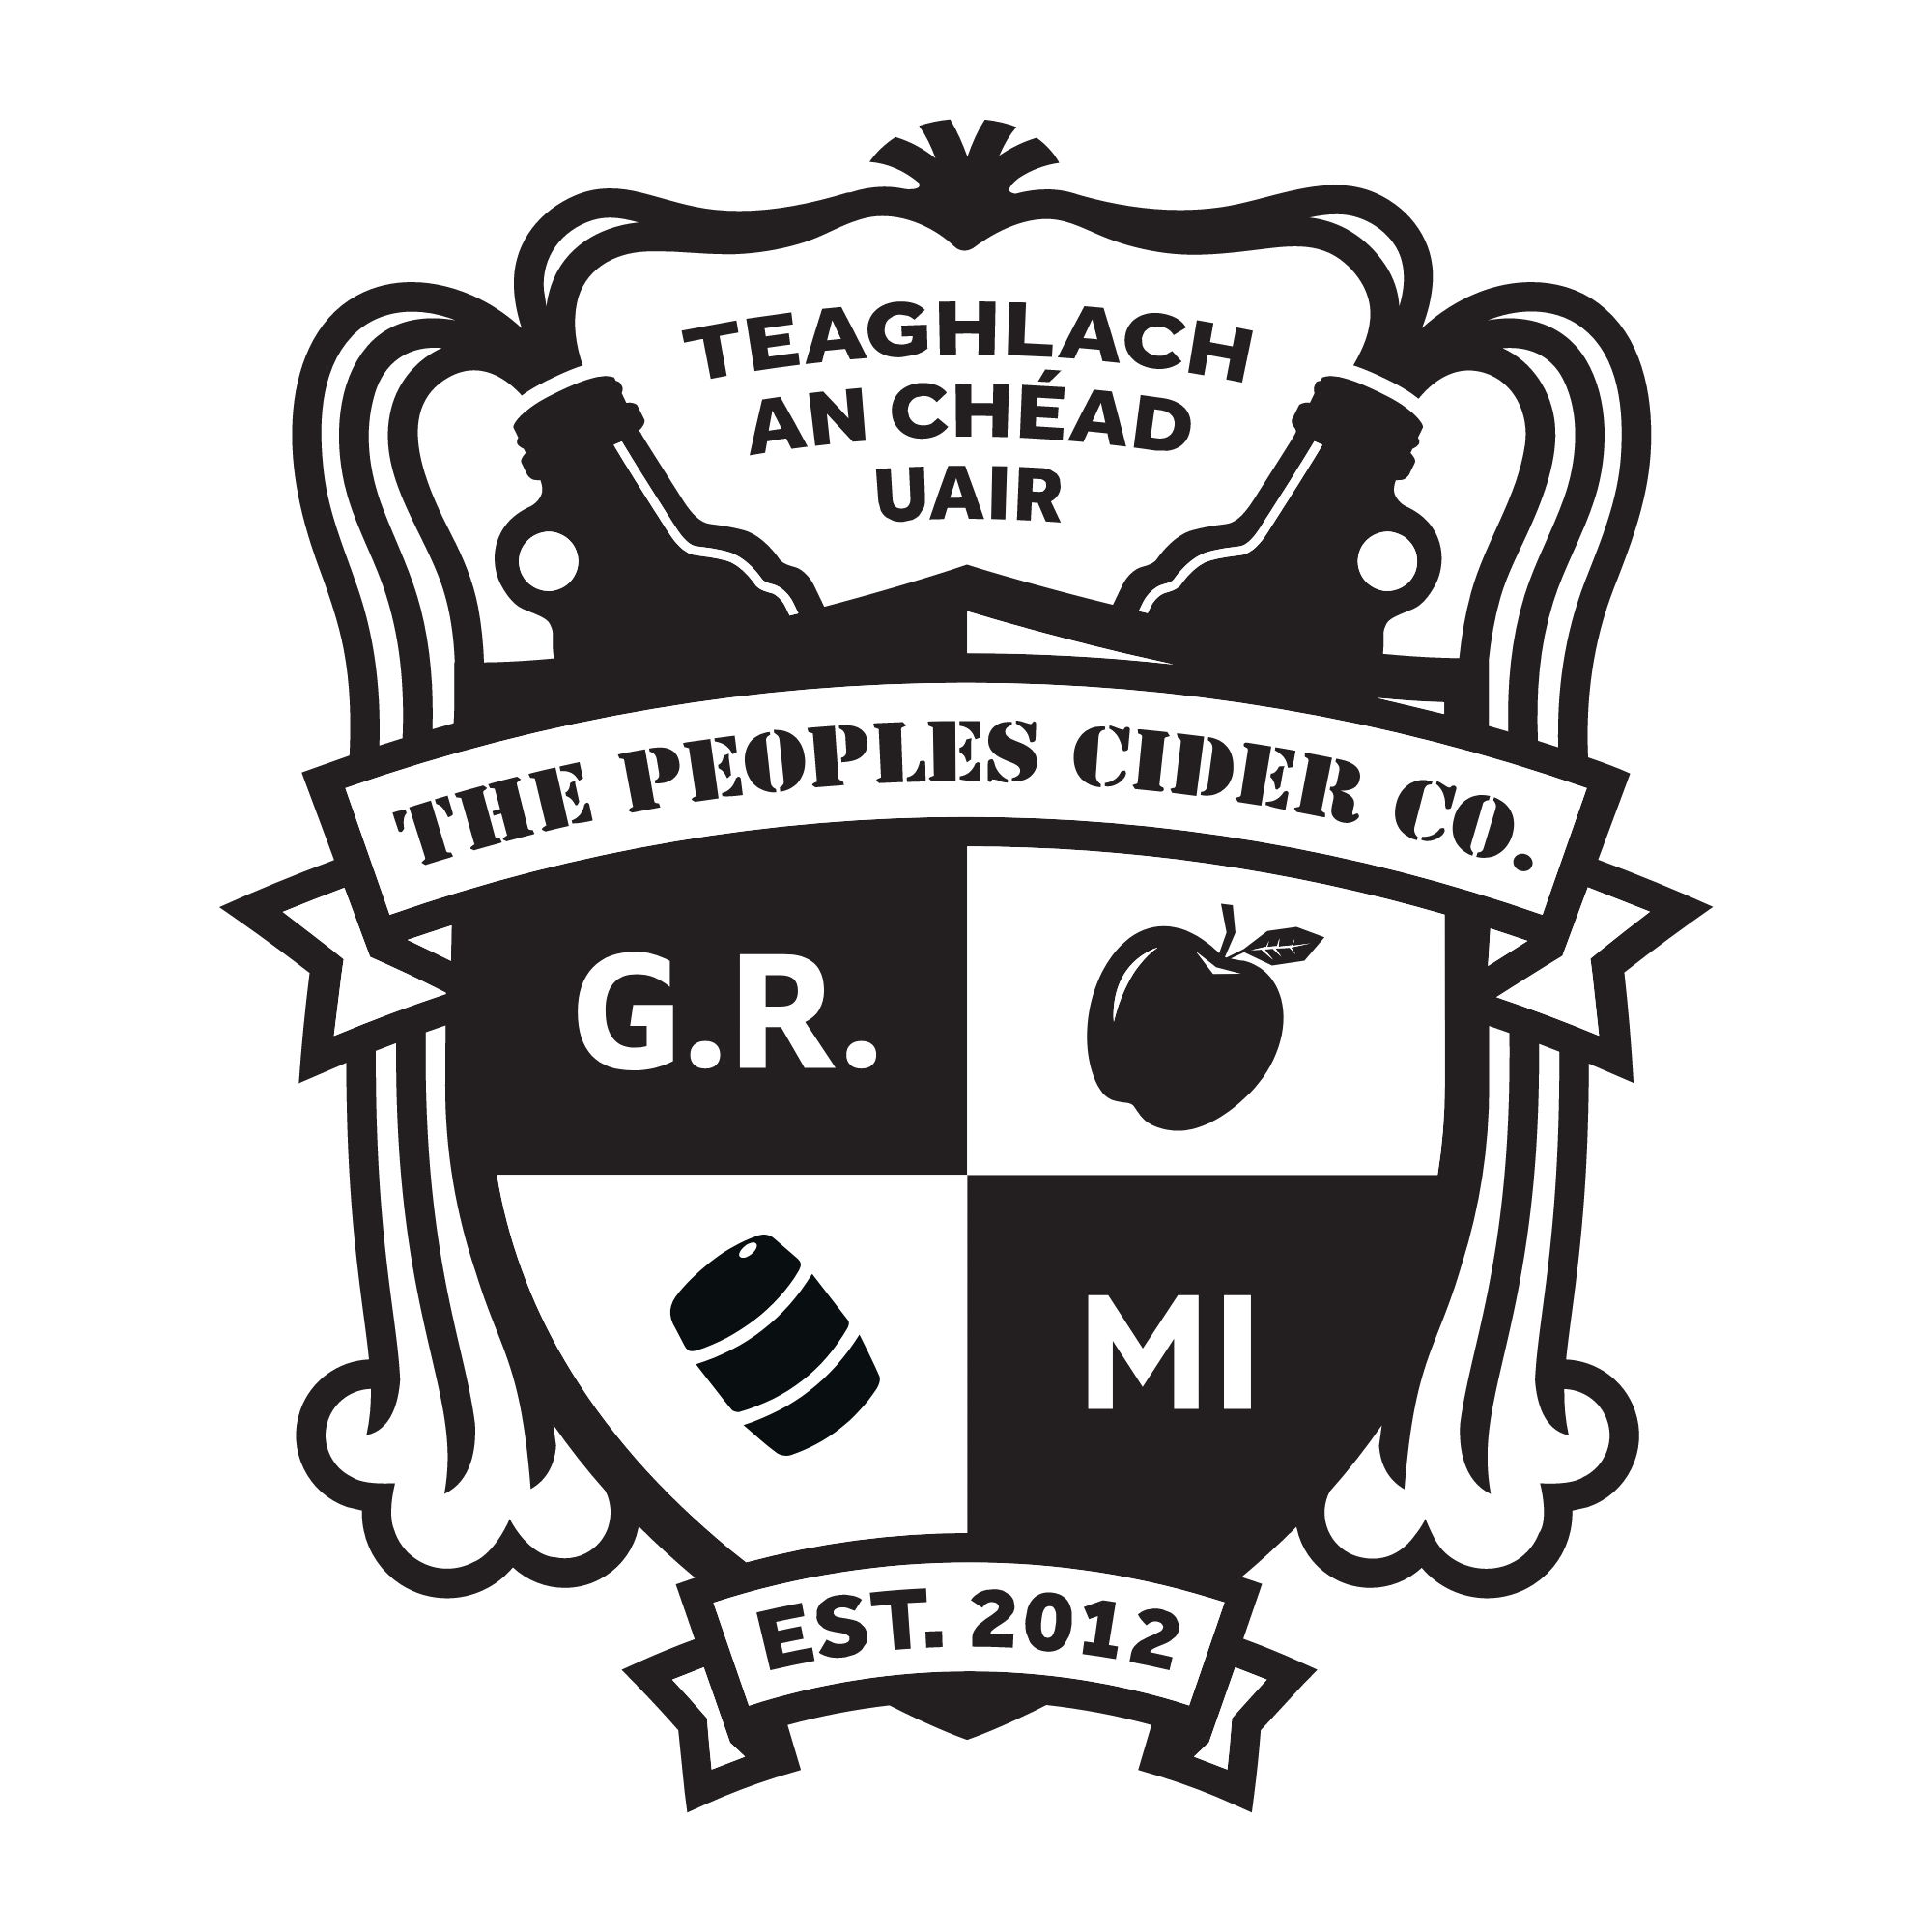 The Peoples Cider Company